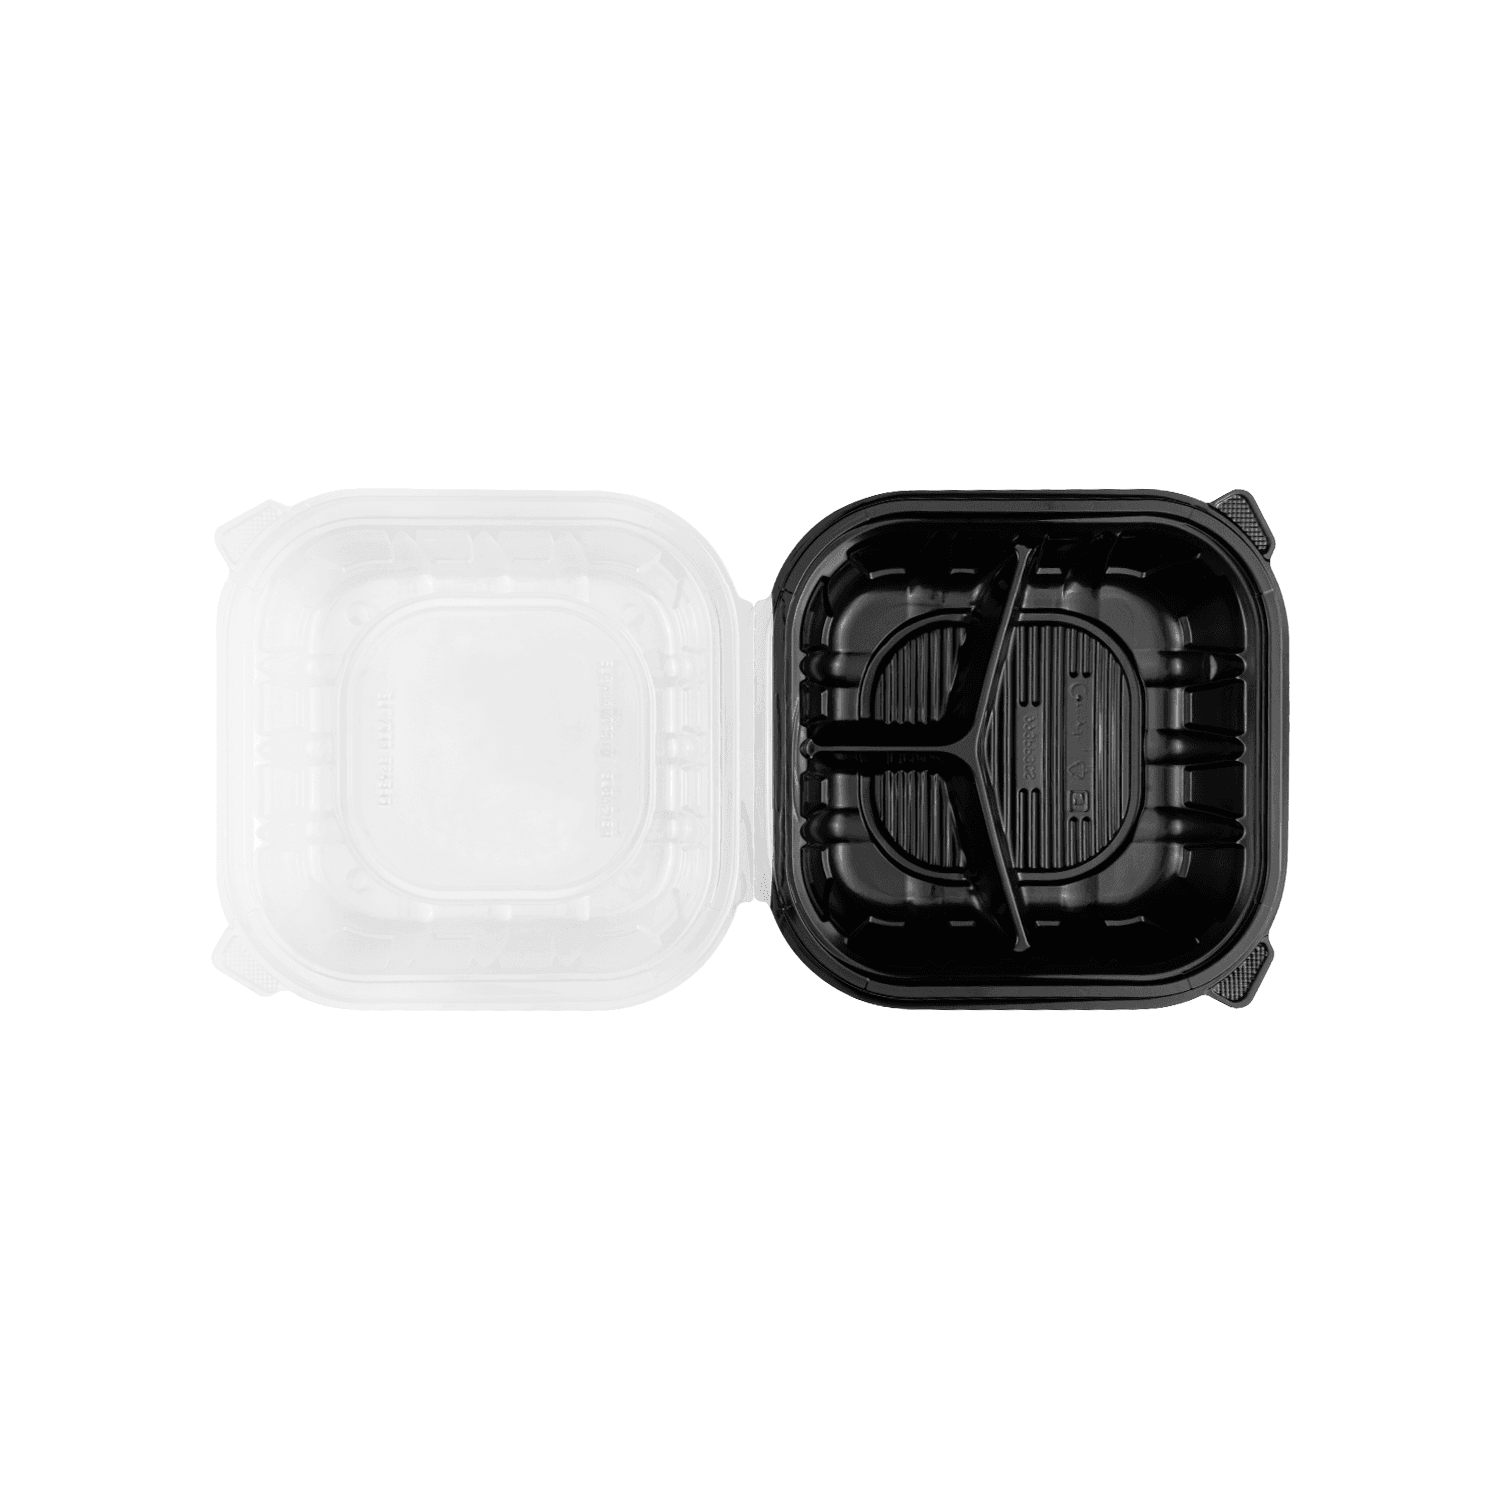 Karat 9"x 9" Premium PP Hinged Container with 3 compartments